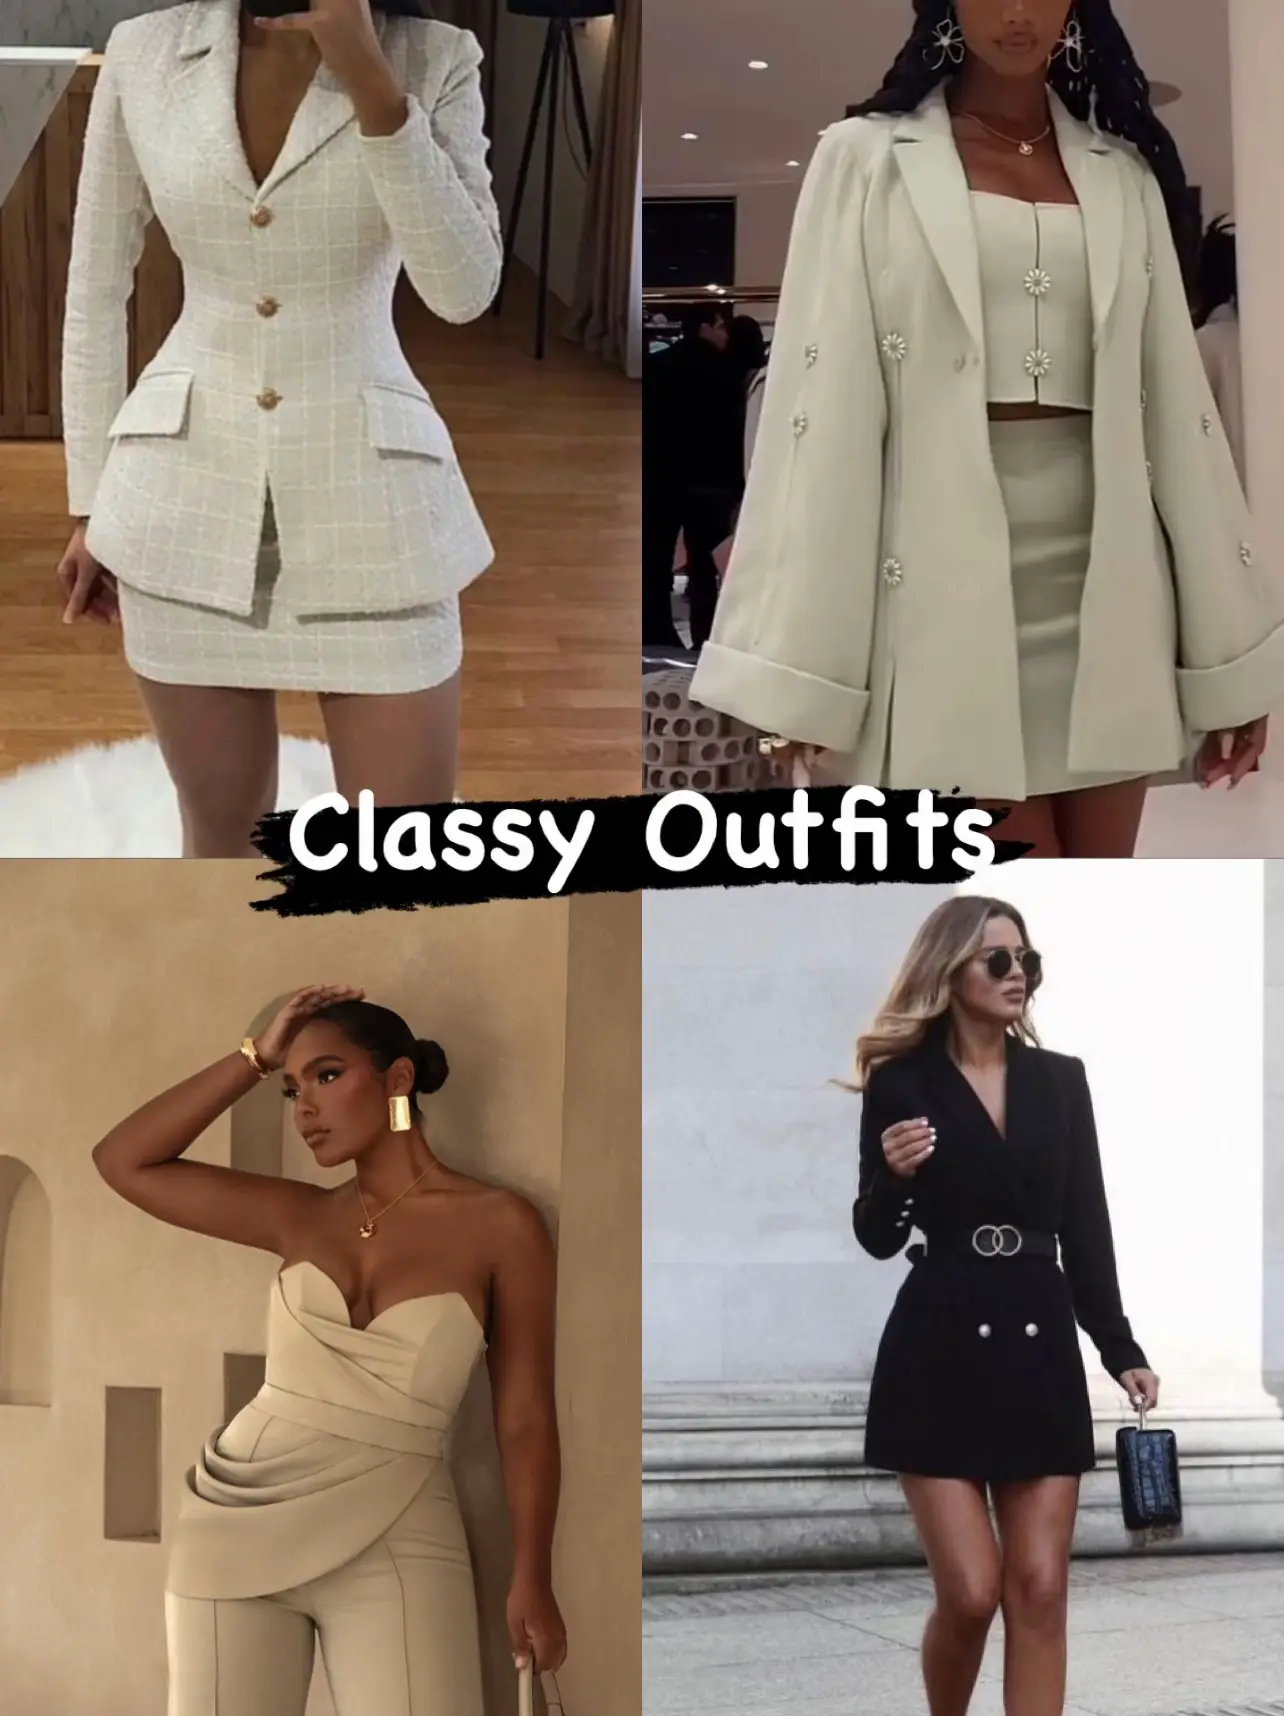 ootd outfit ideas classy - Lemon8 Search